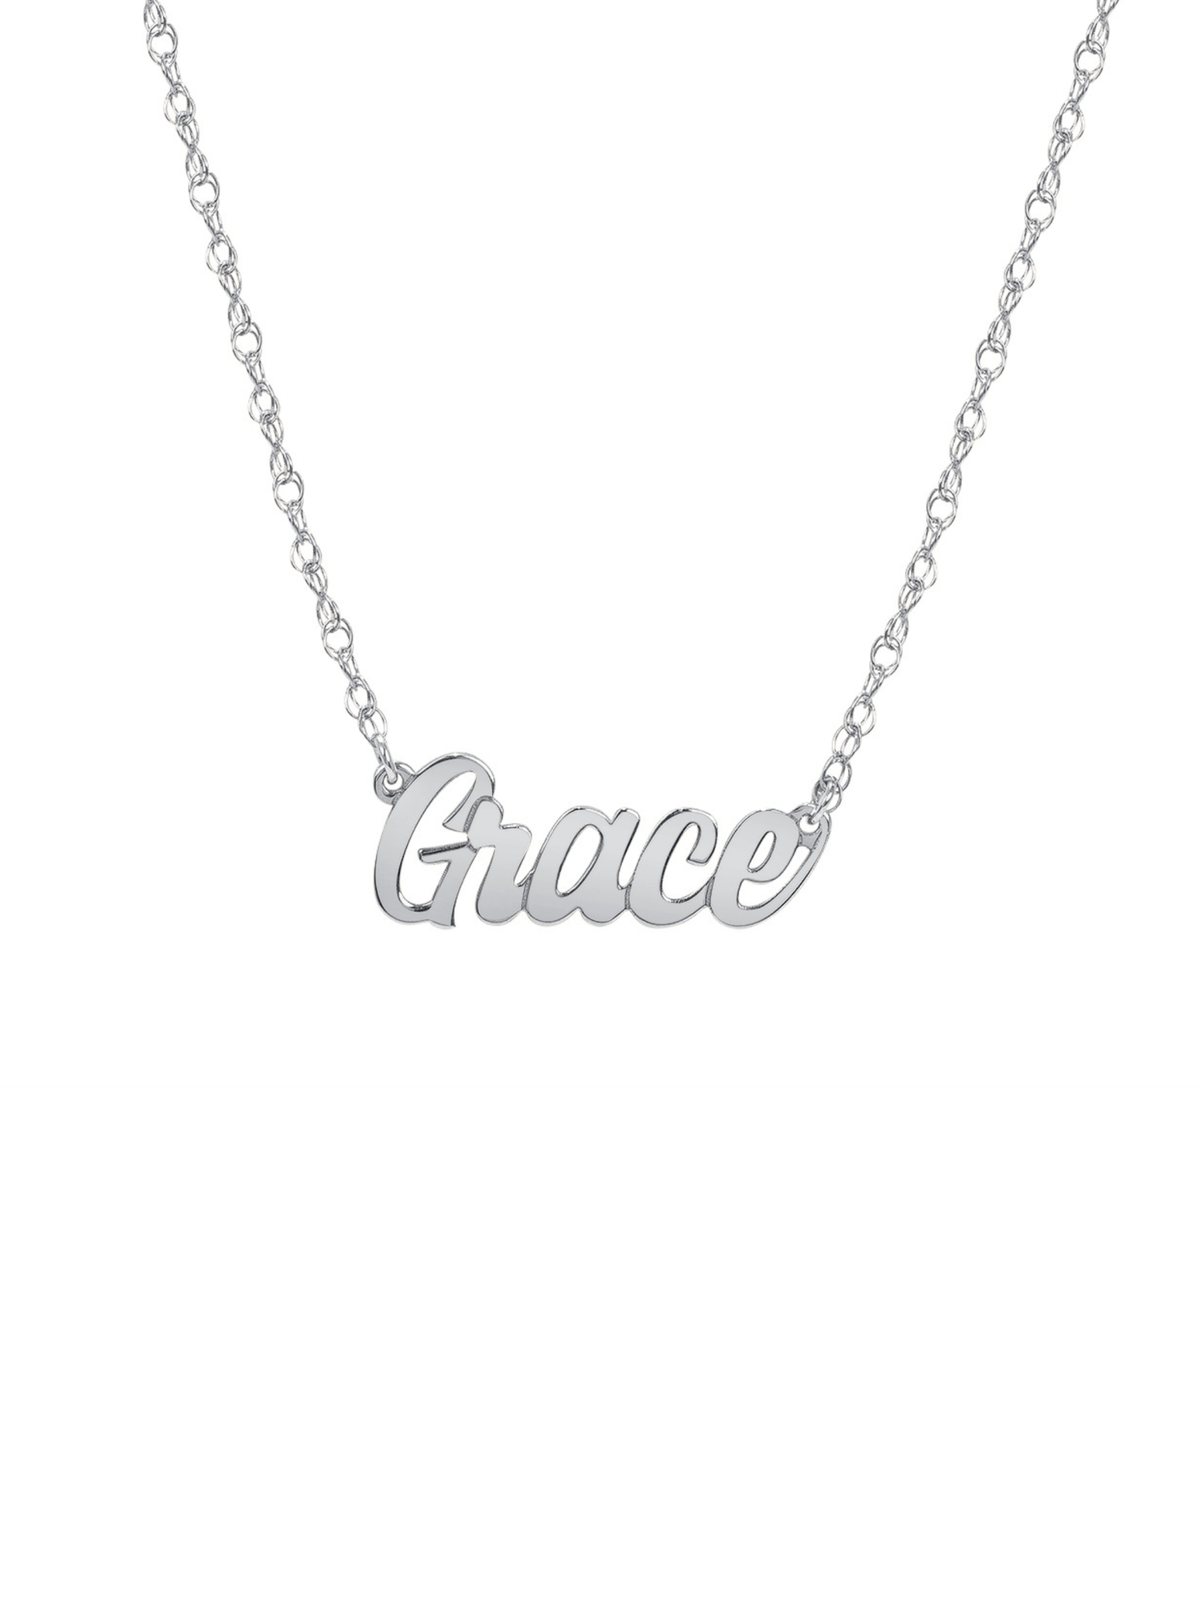 White gold script name necklace on white background